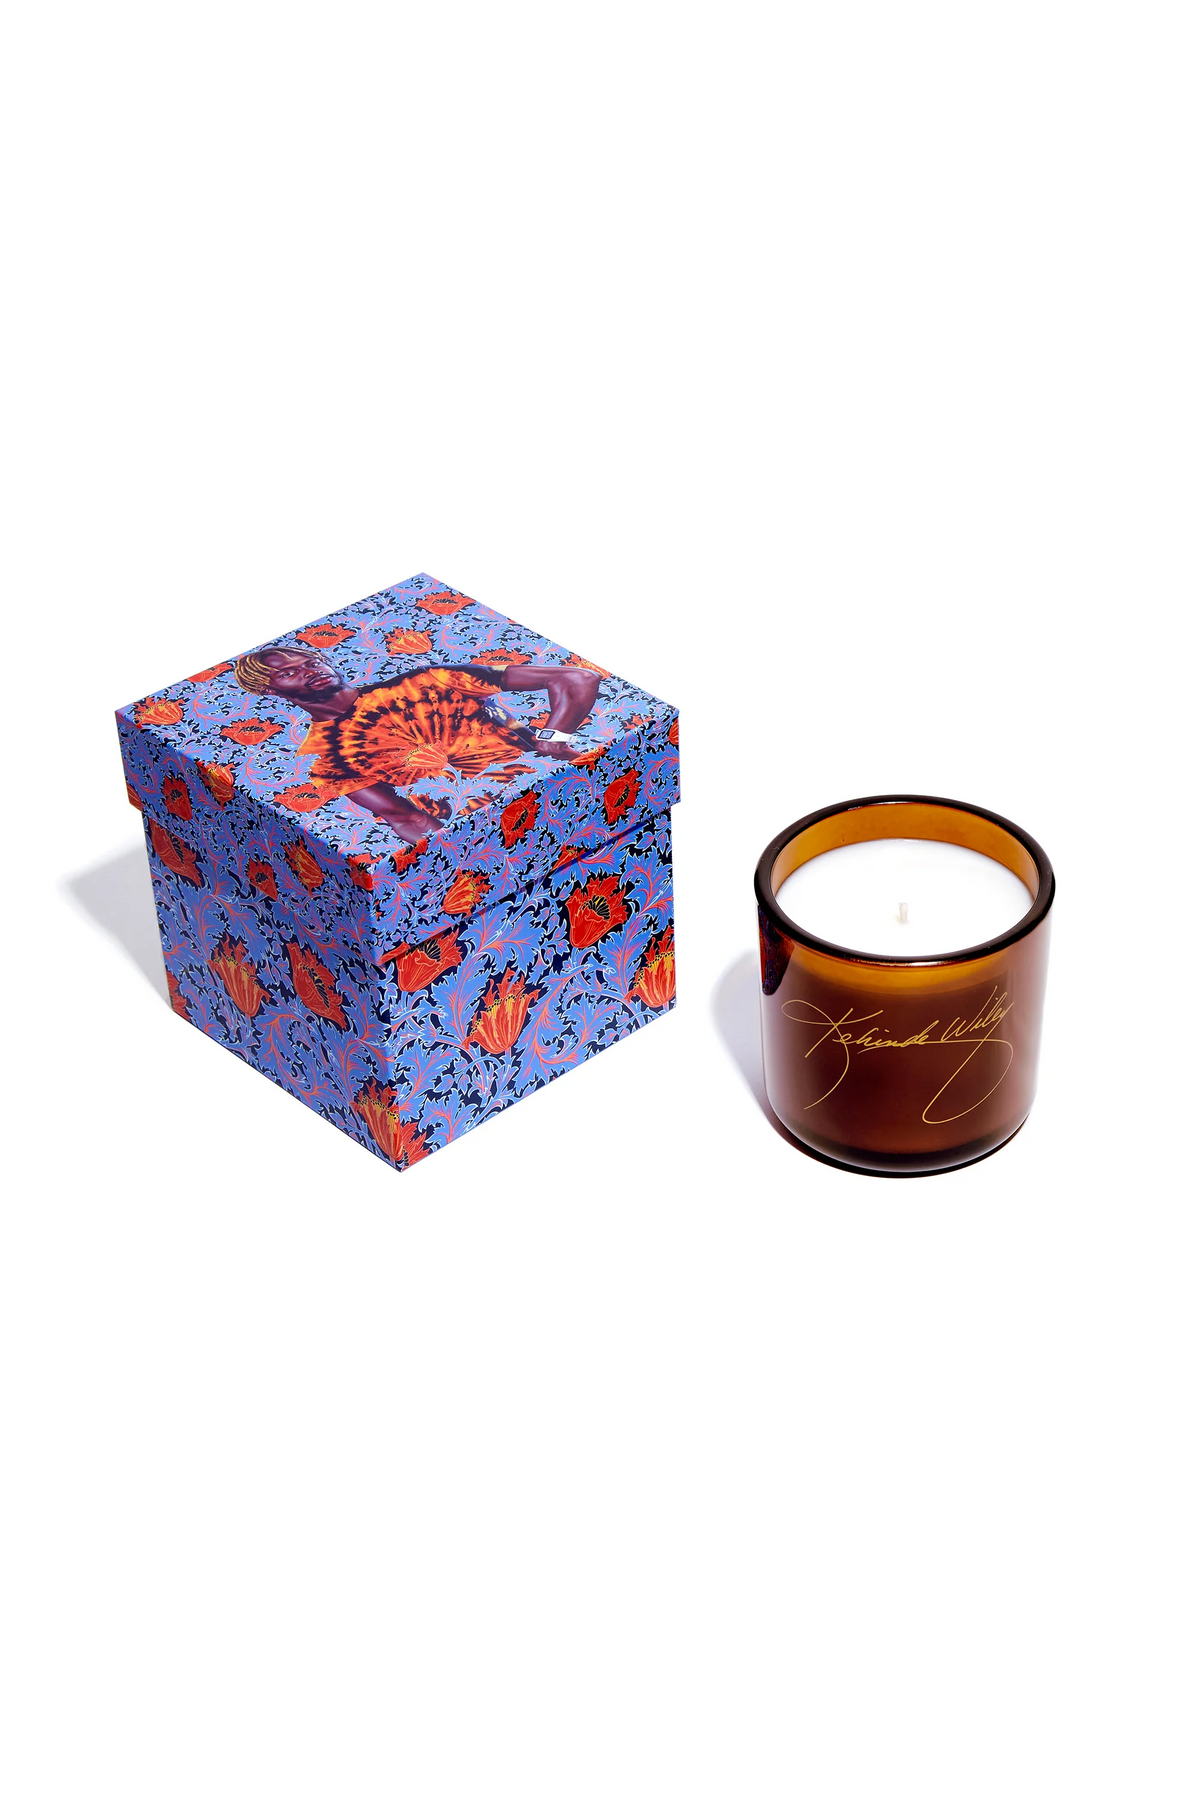 Kehinde Wiley Blue Boy Candle